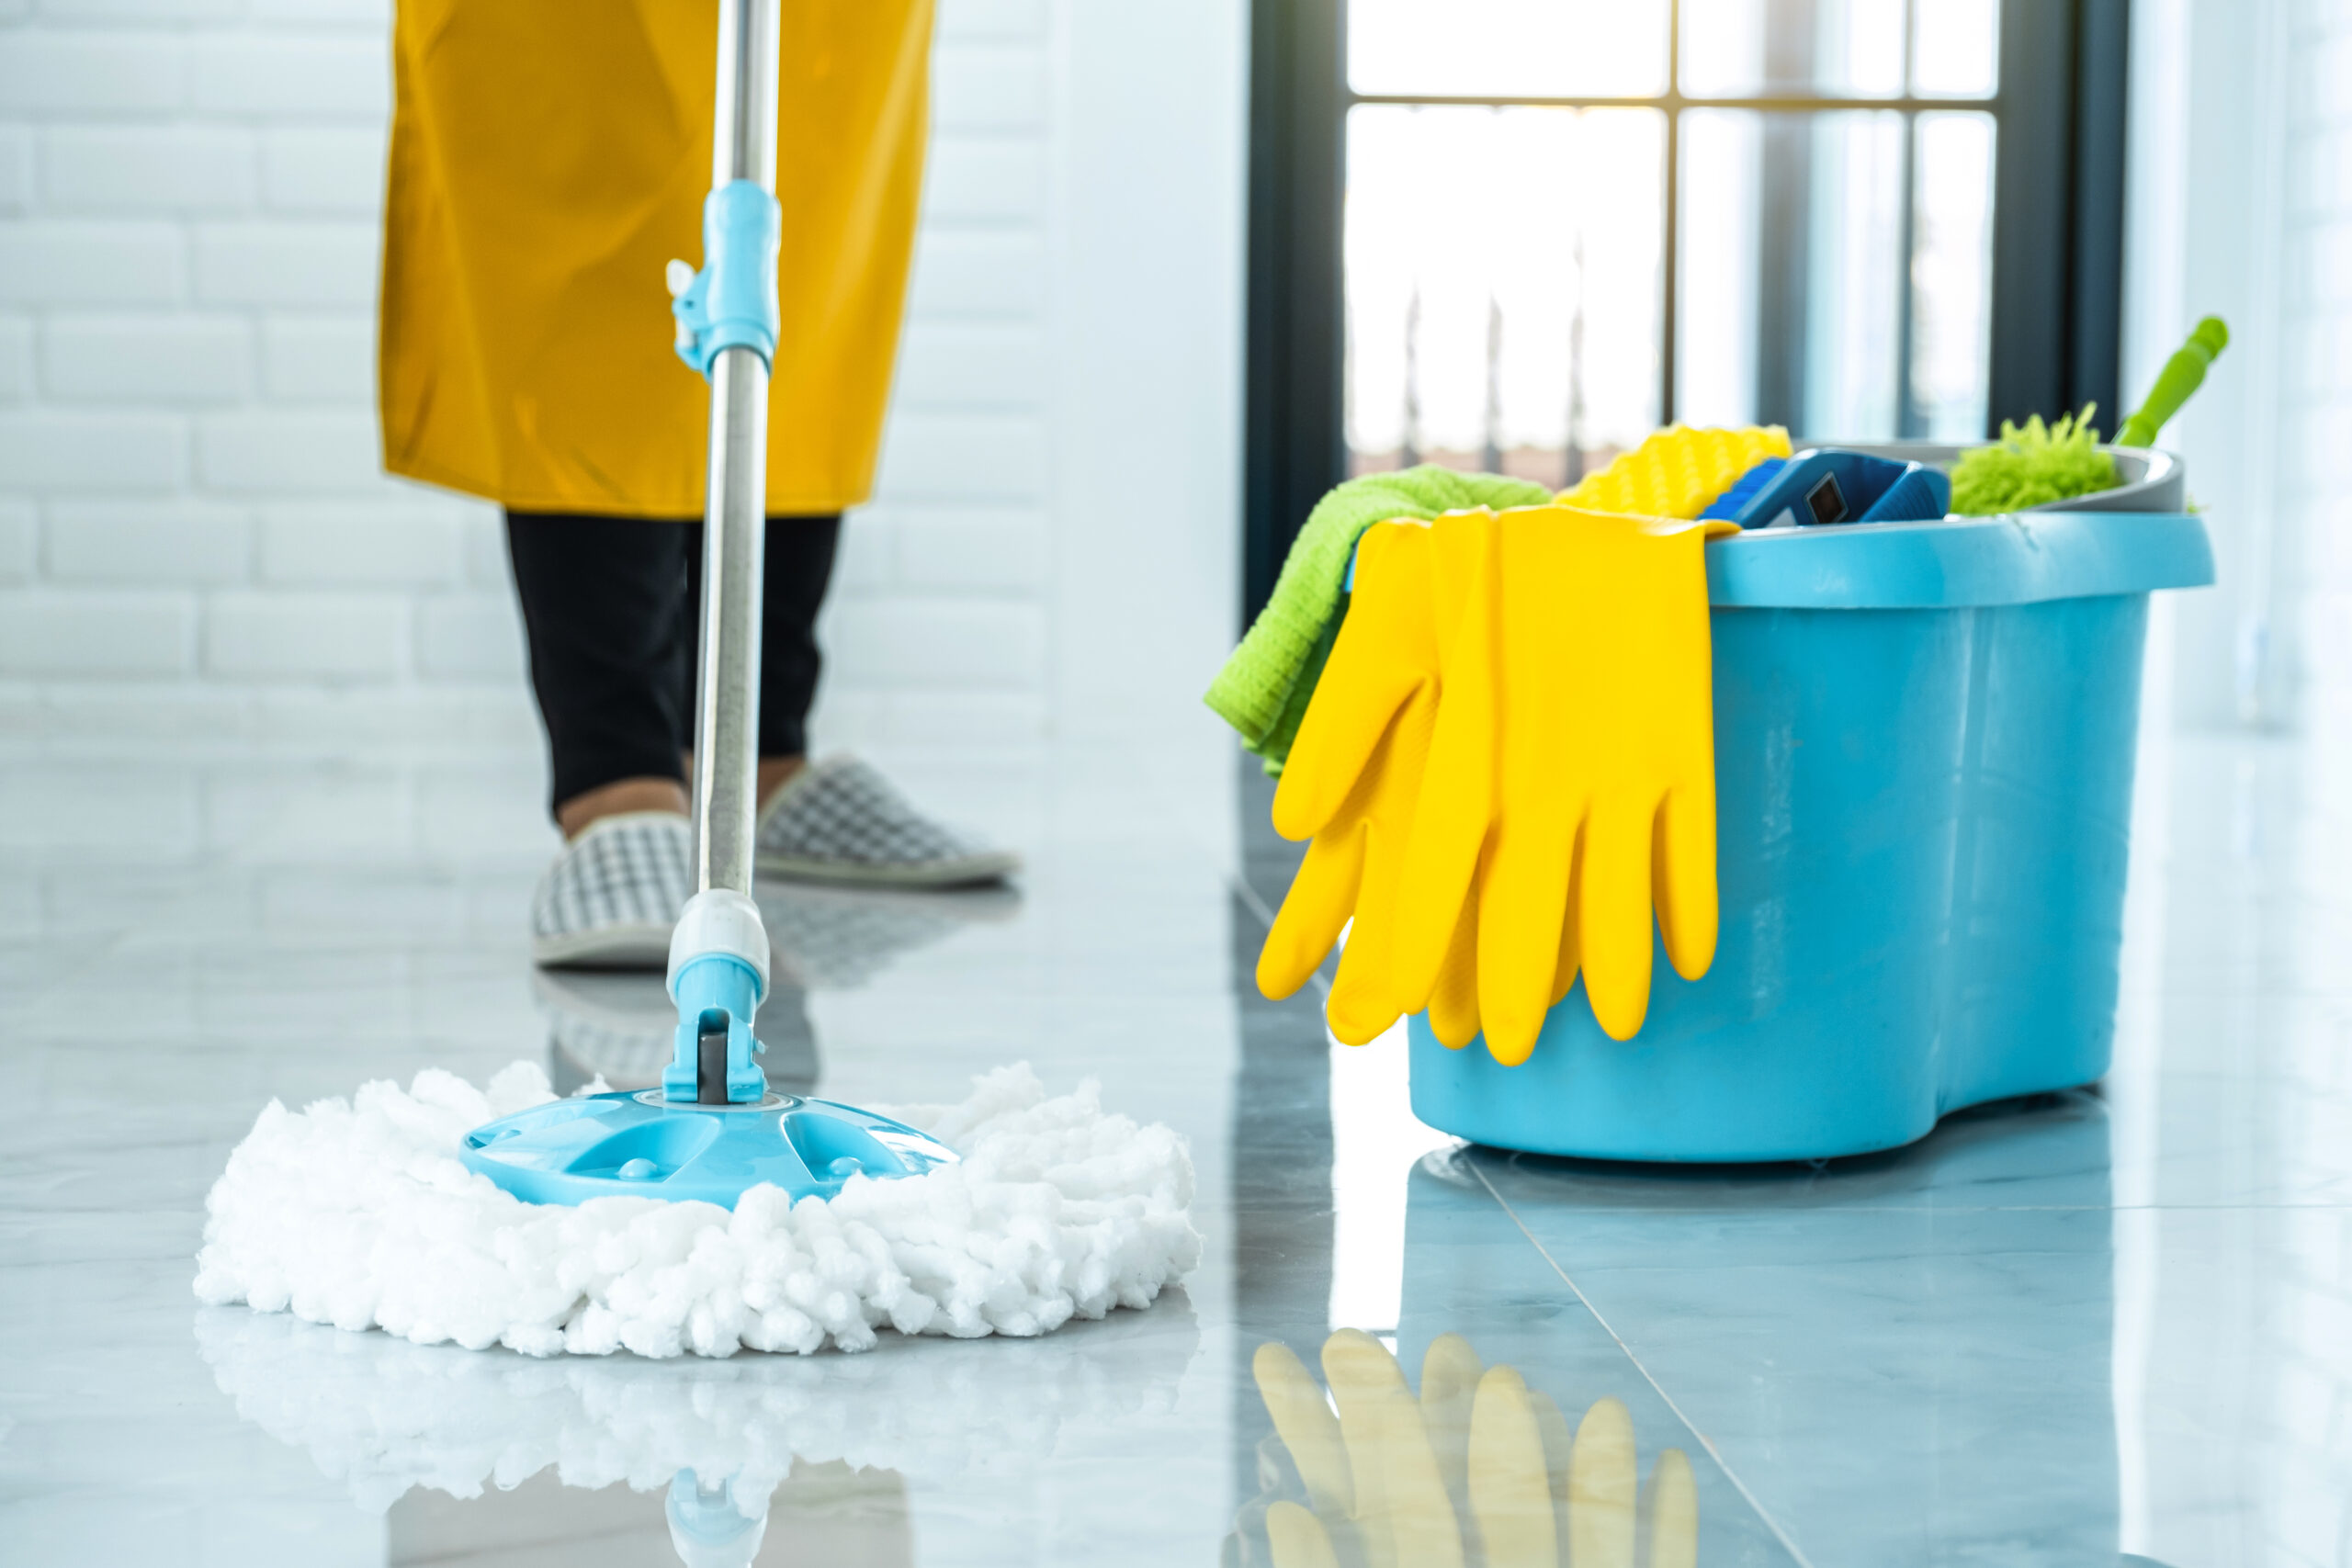 Wife housekeeping and cleaning concept, Happy young woman in blue rubber gloves wiping dust using mop while cleaning on floor at home.